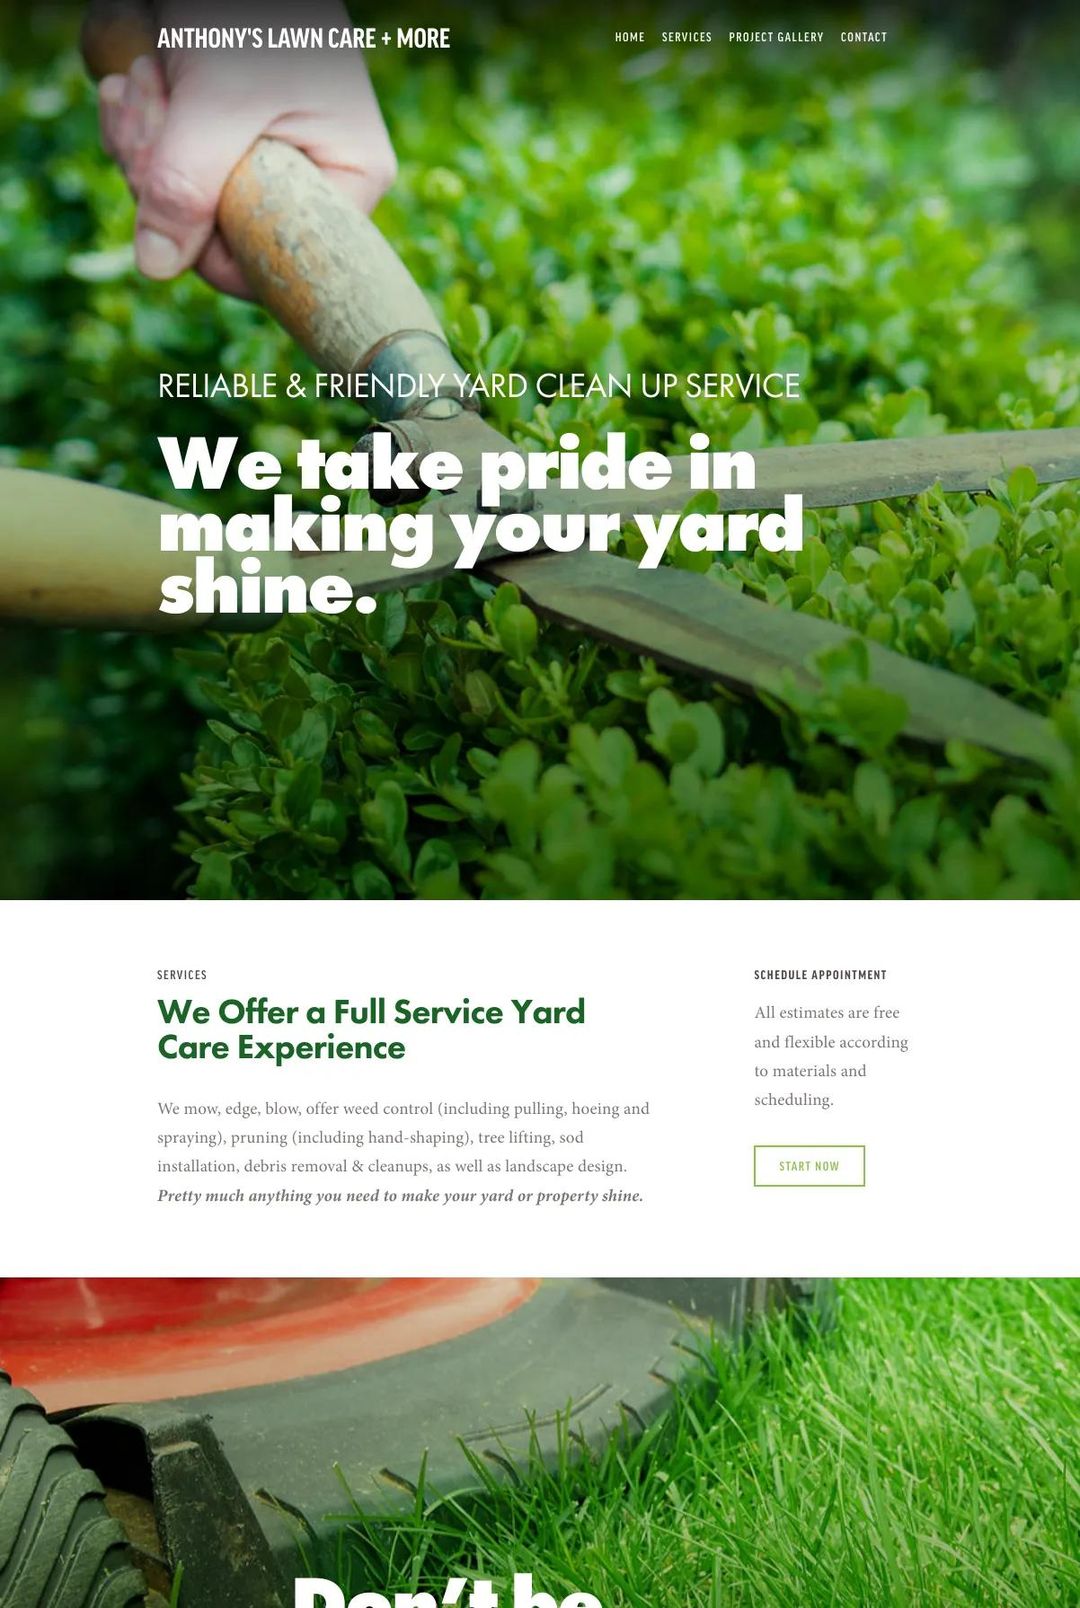 Screenshot 1 of Anthony's Lawn Care + More (Example Squarespace Lawn Care Website)